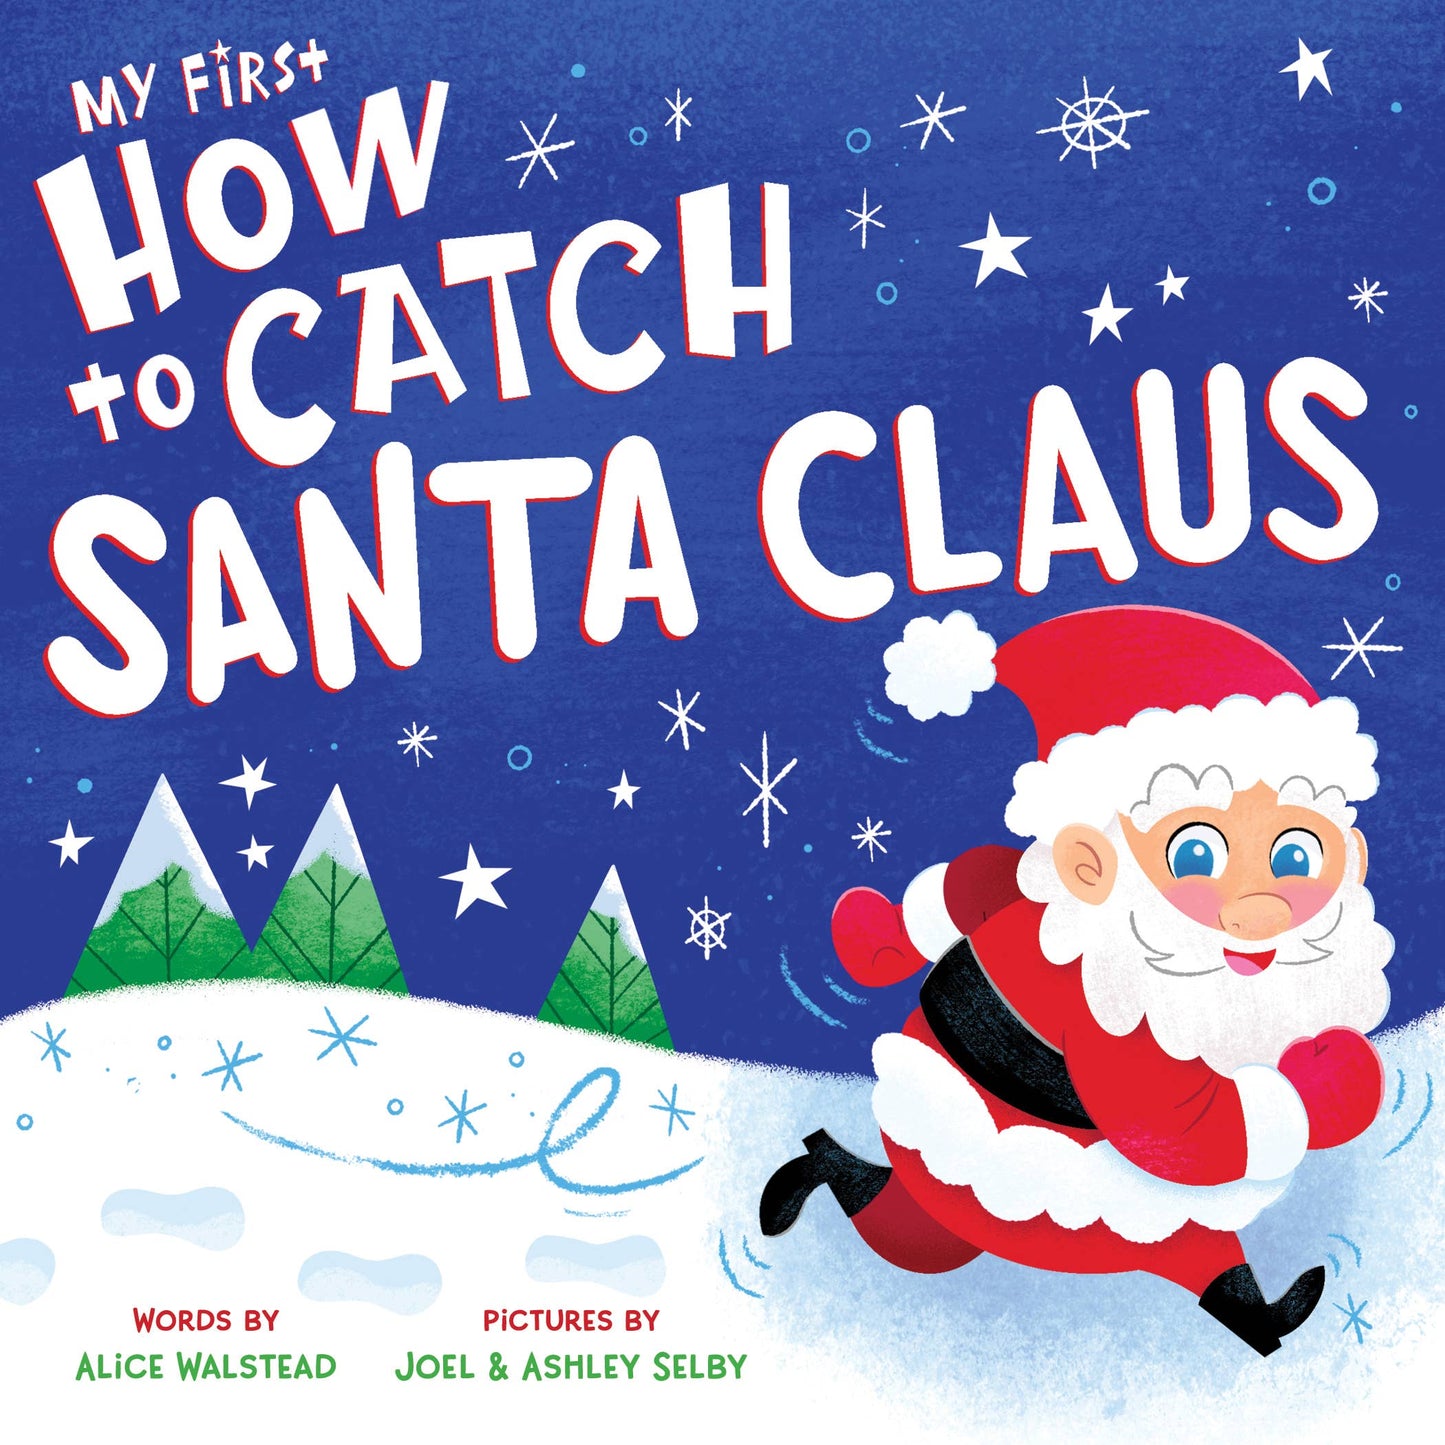 My First How to Catch Santa